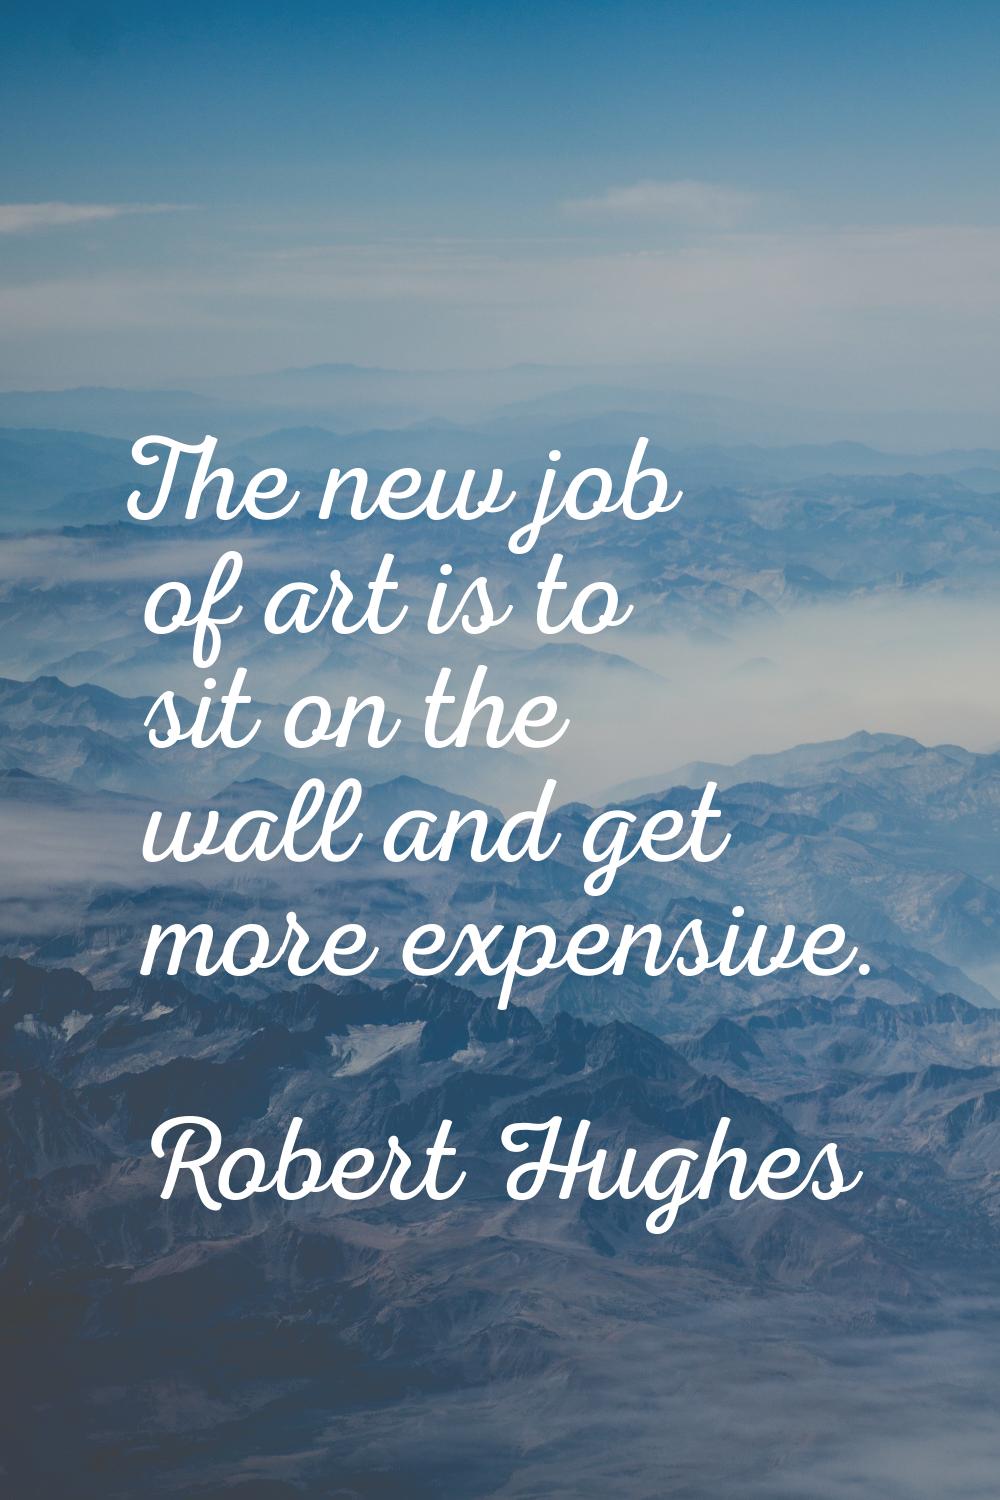 The new job of art is to sit on the wall and get more expensive.